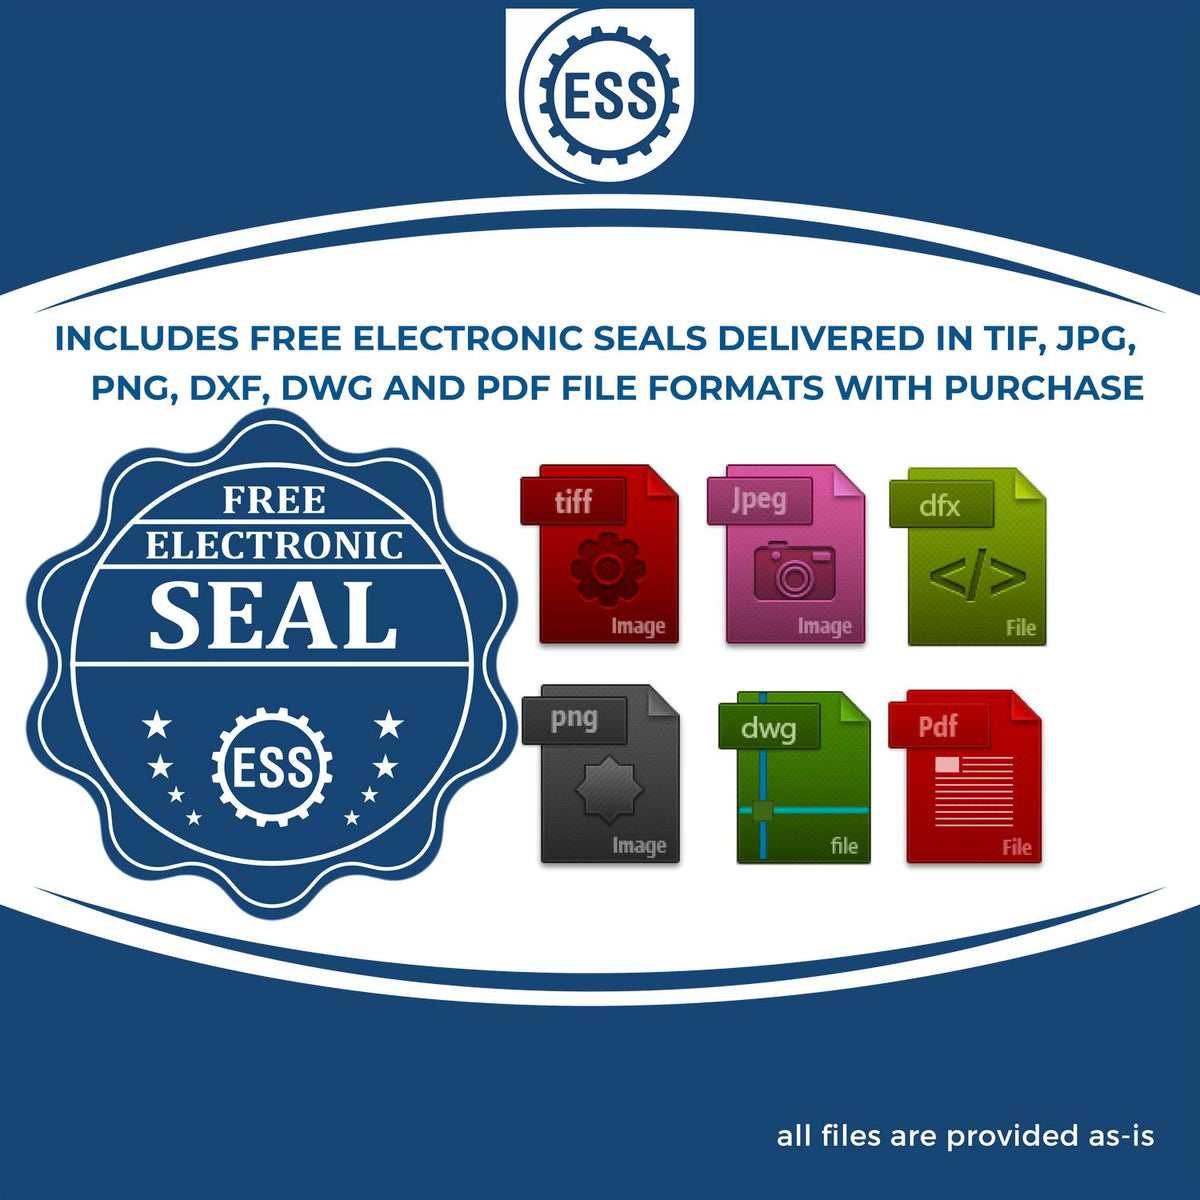 An infographic for the free electronic seal for the Heavy Duty Cast Iron New Jersey Architect Embosser illustrating the different file type icons such as DXF, DWG, TIF, JPG and PNG.